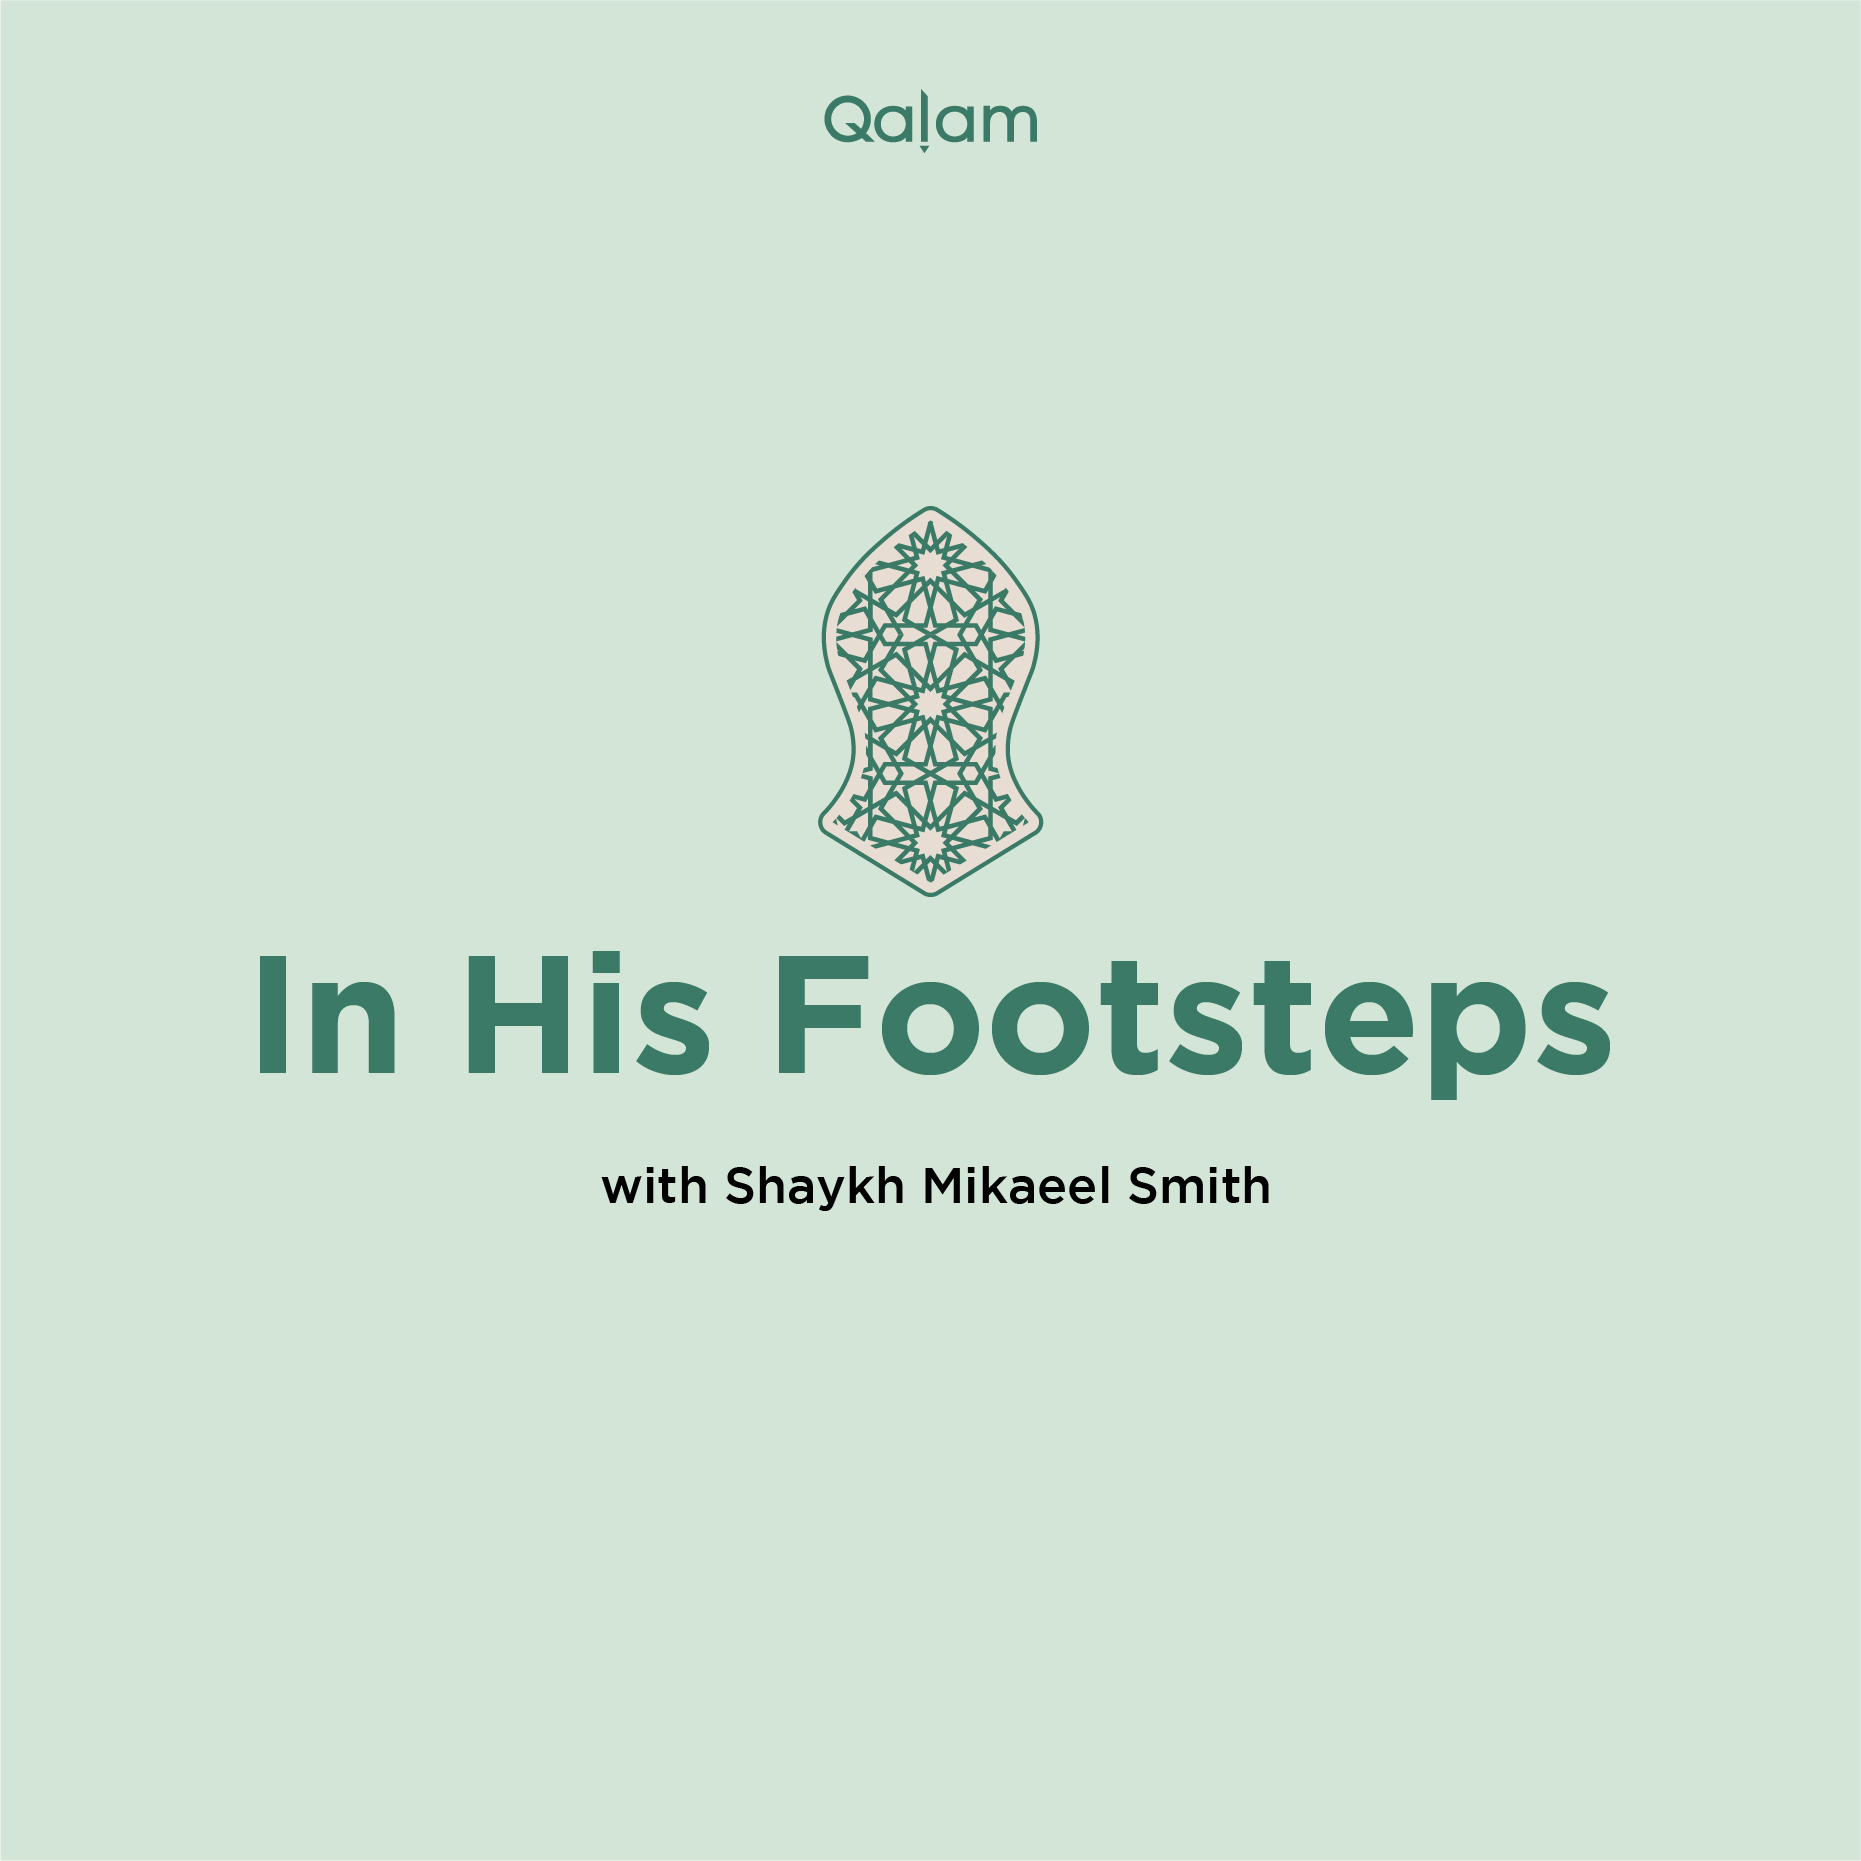 In His Footsteps: EP10